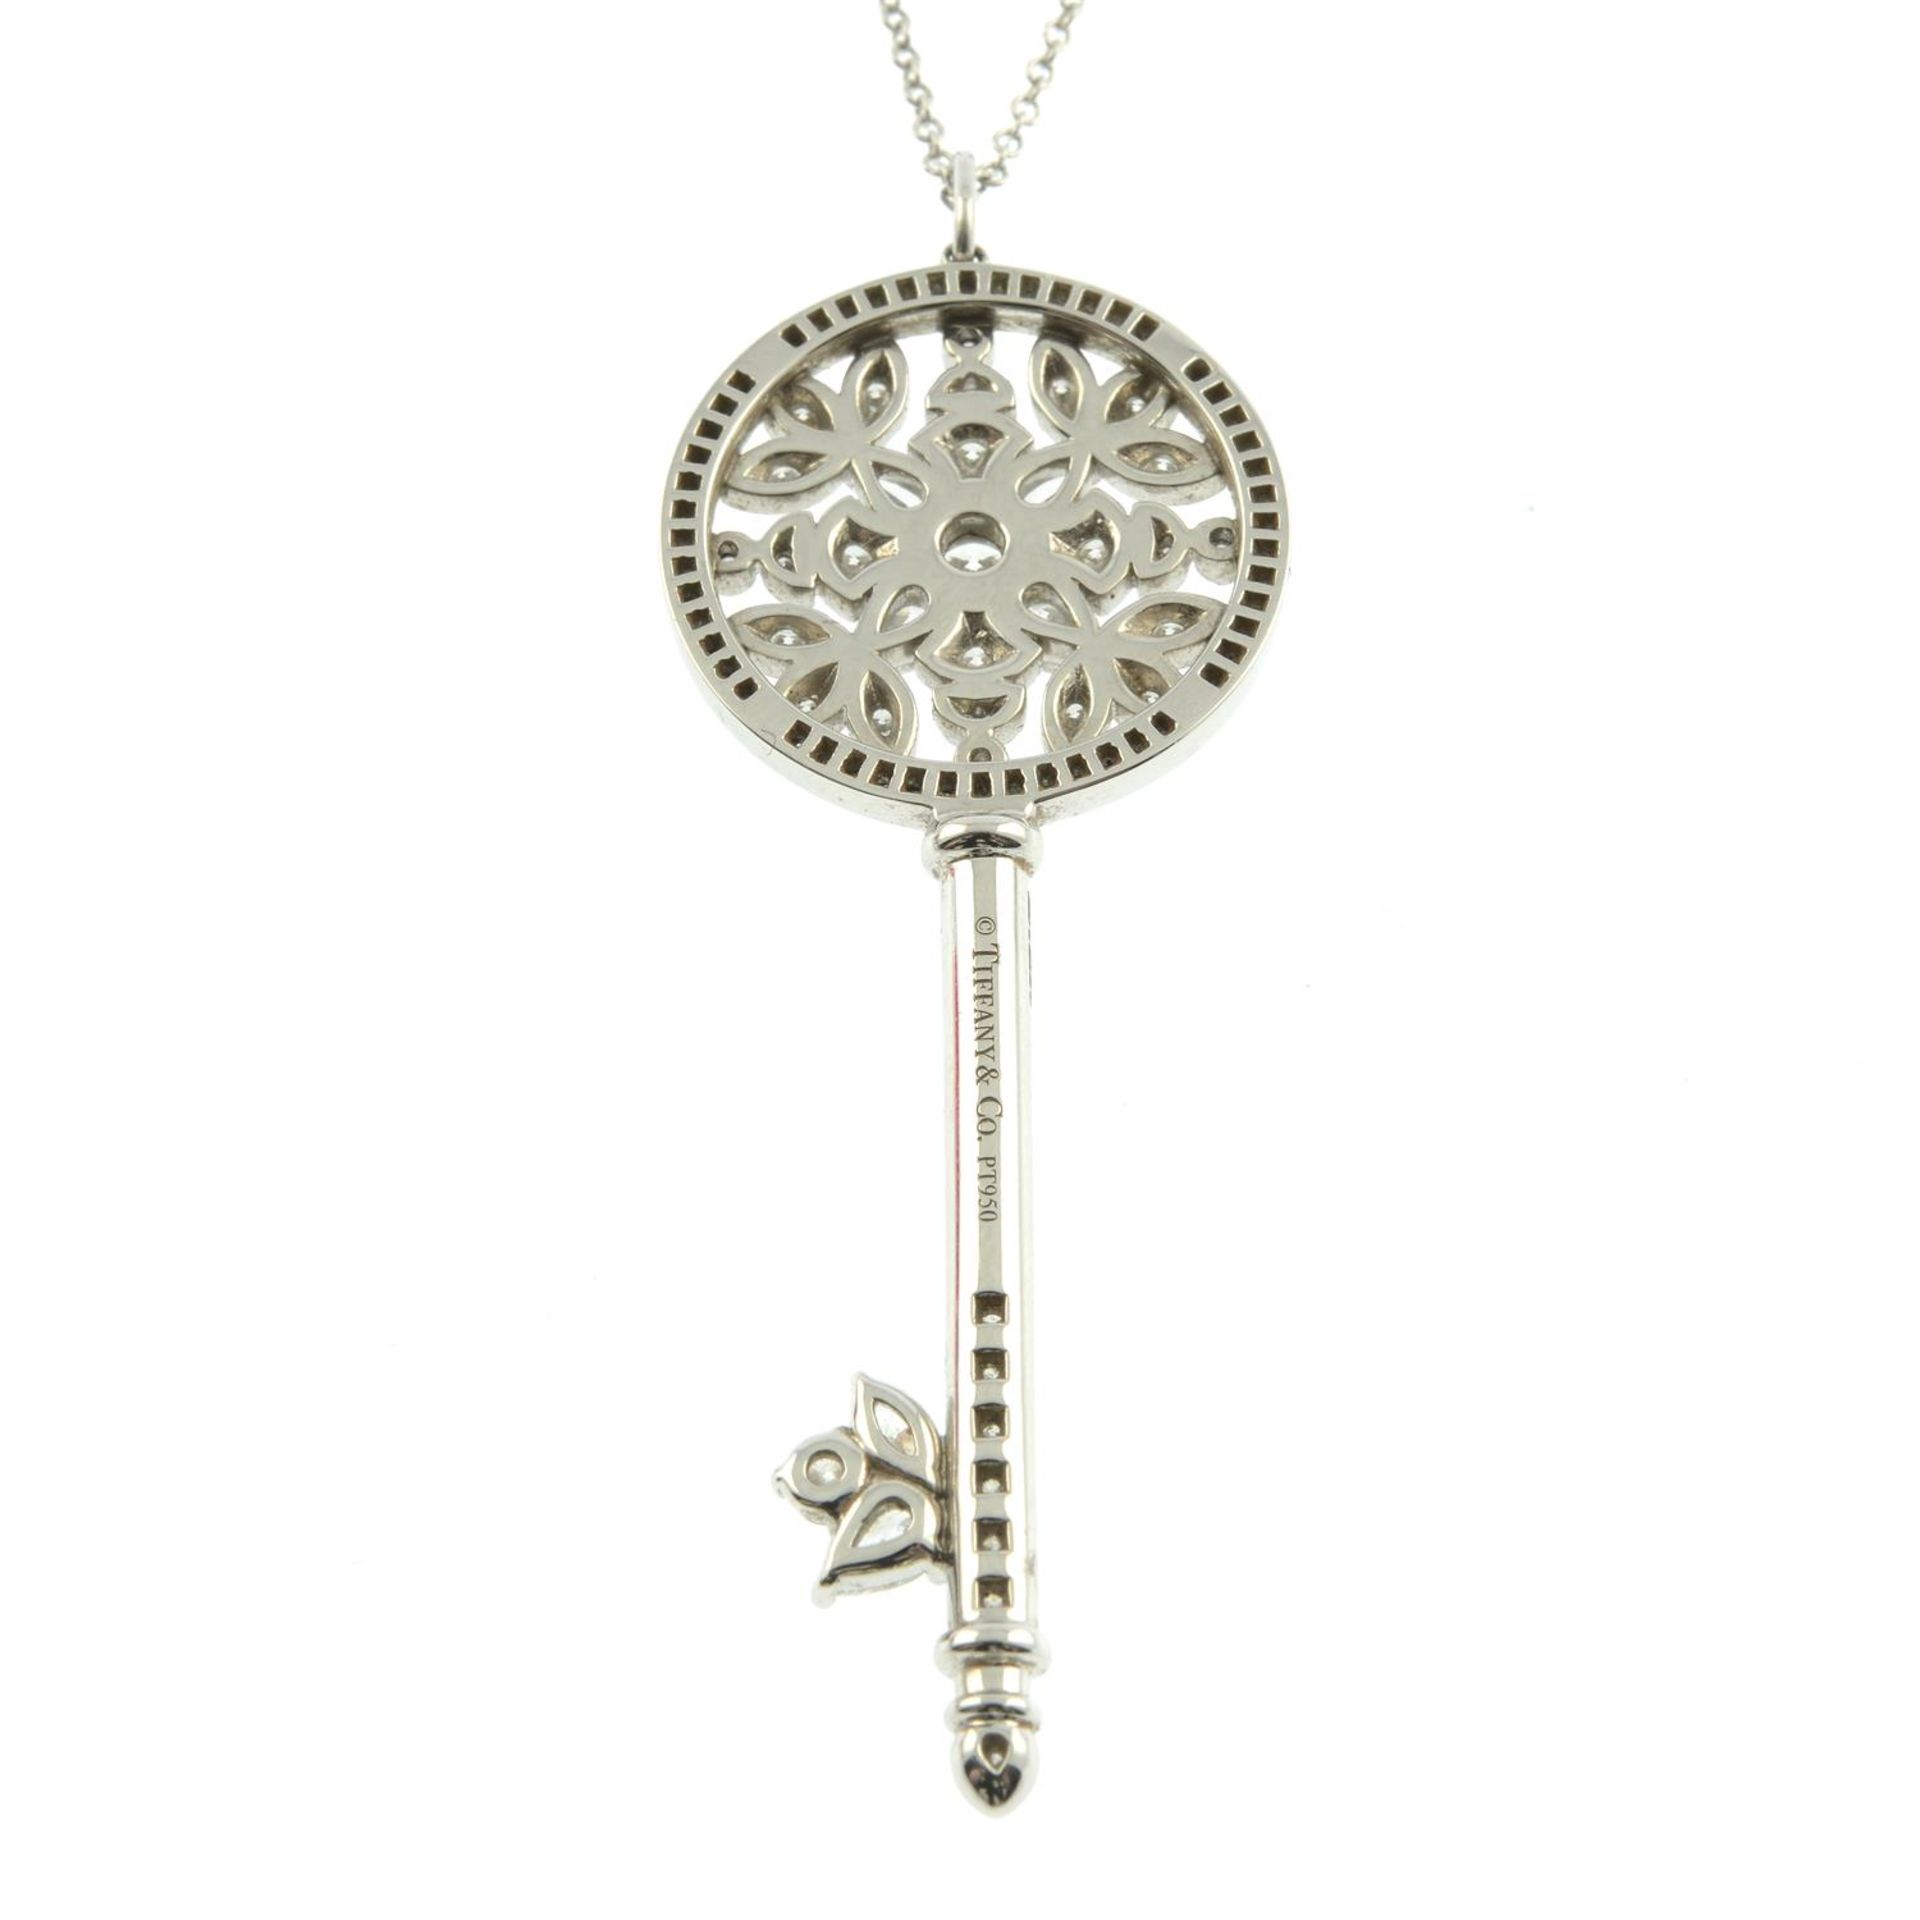 A platinum vari-cut diamond 'Garden' key, with chain, by Tiffany & Co. - Image 3 of 5